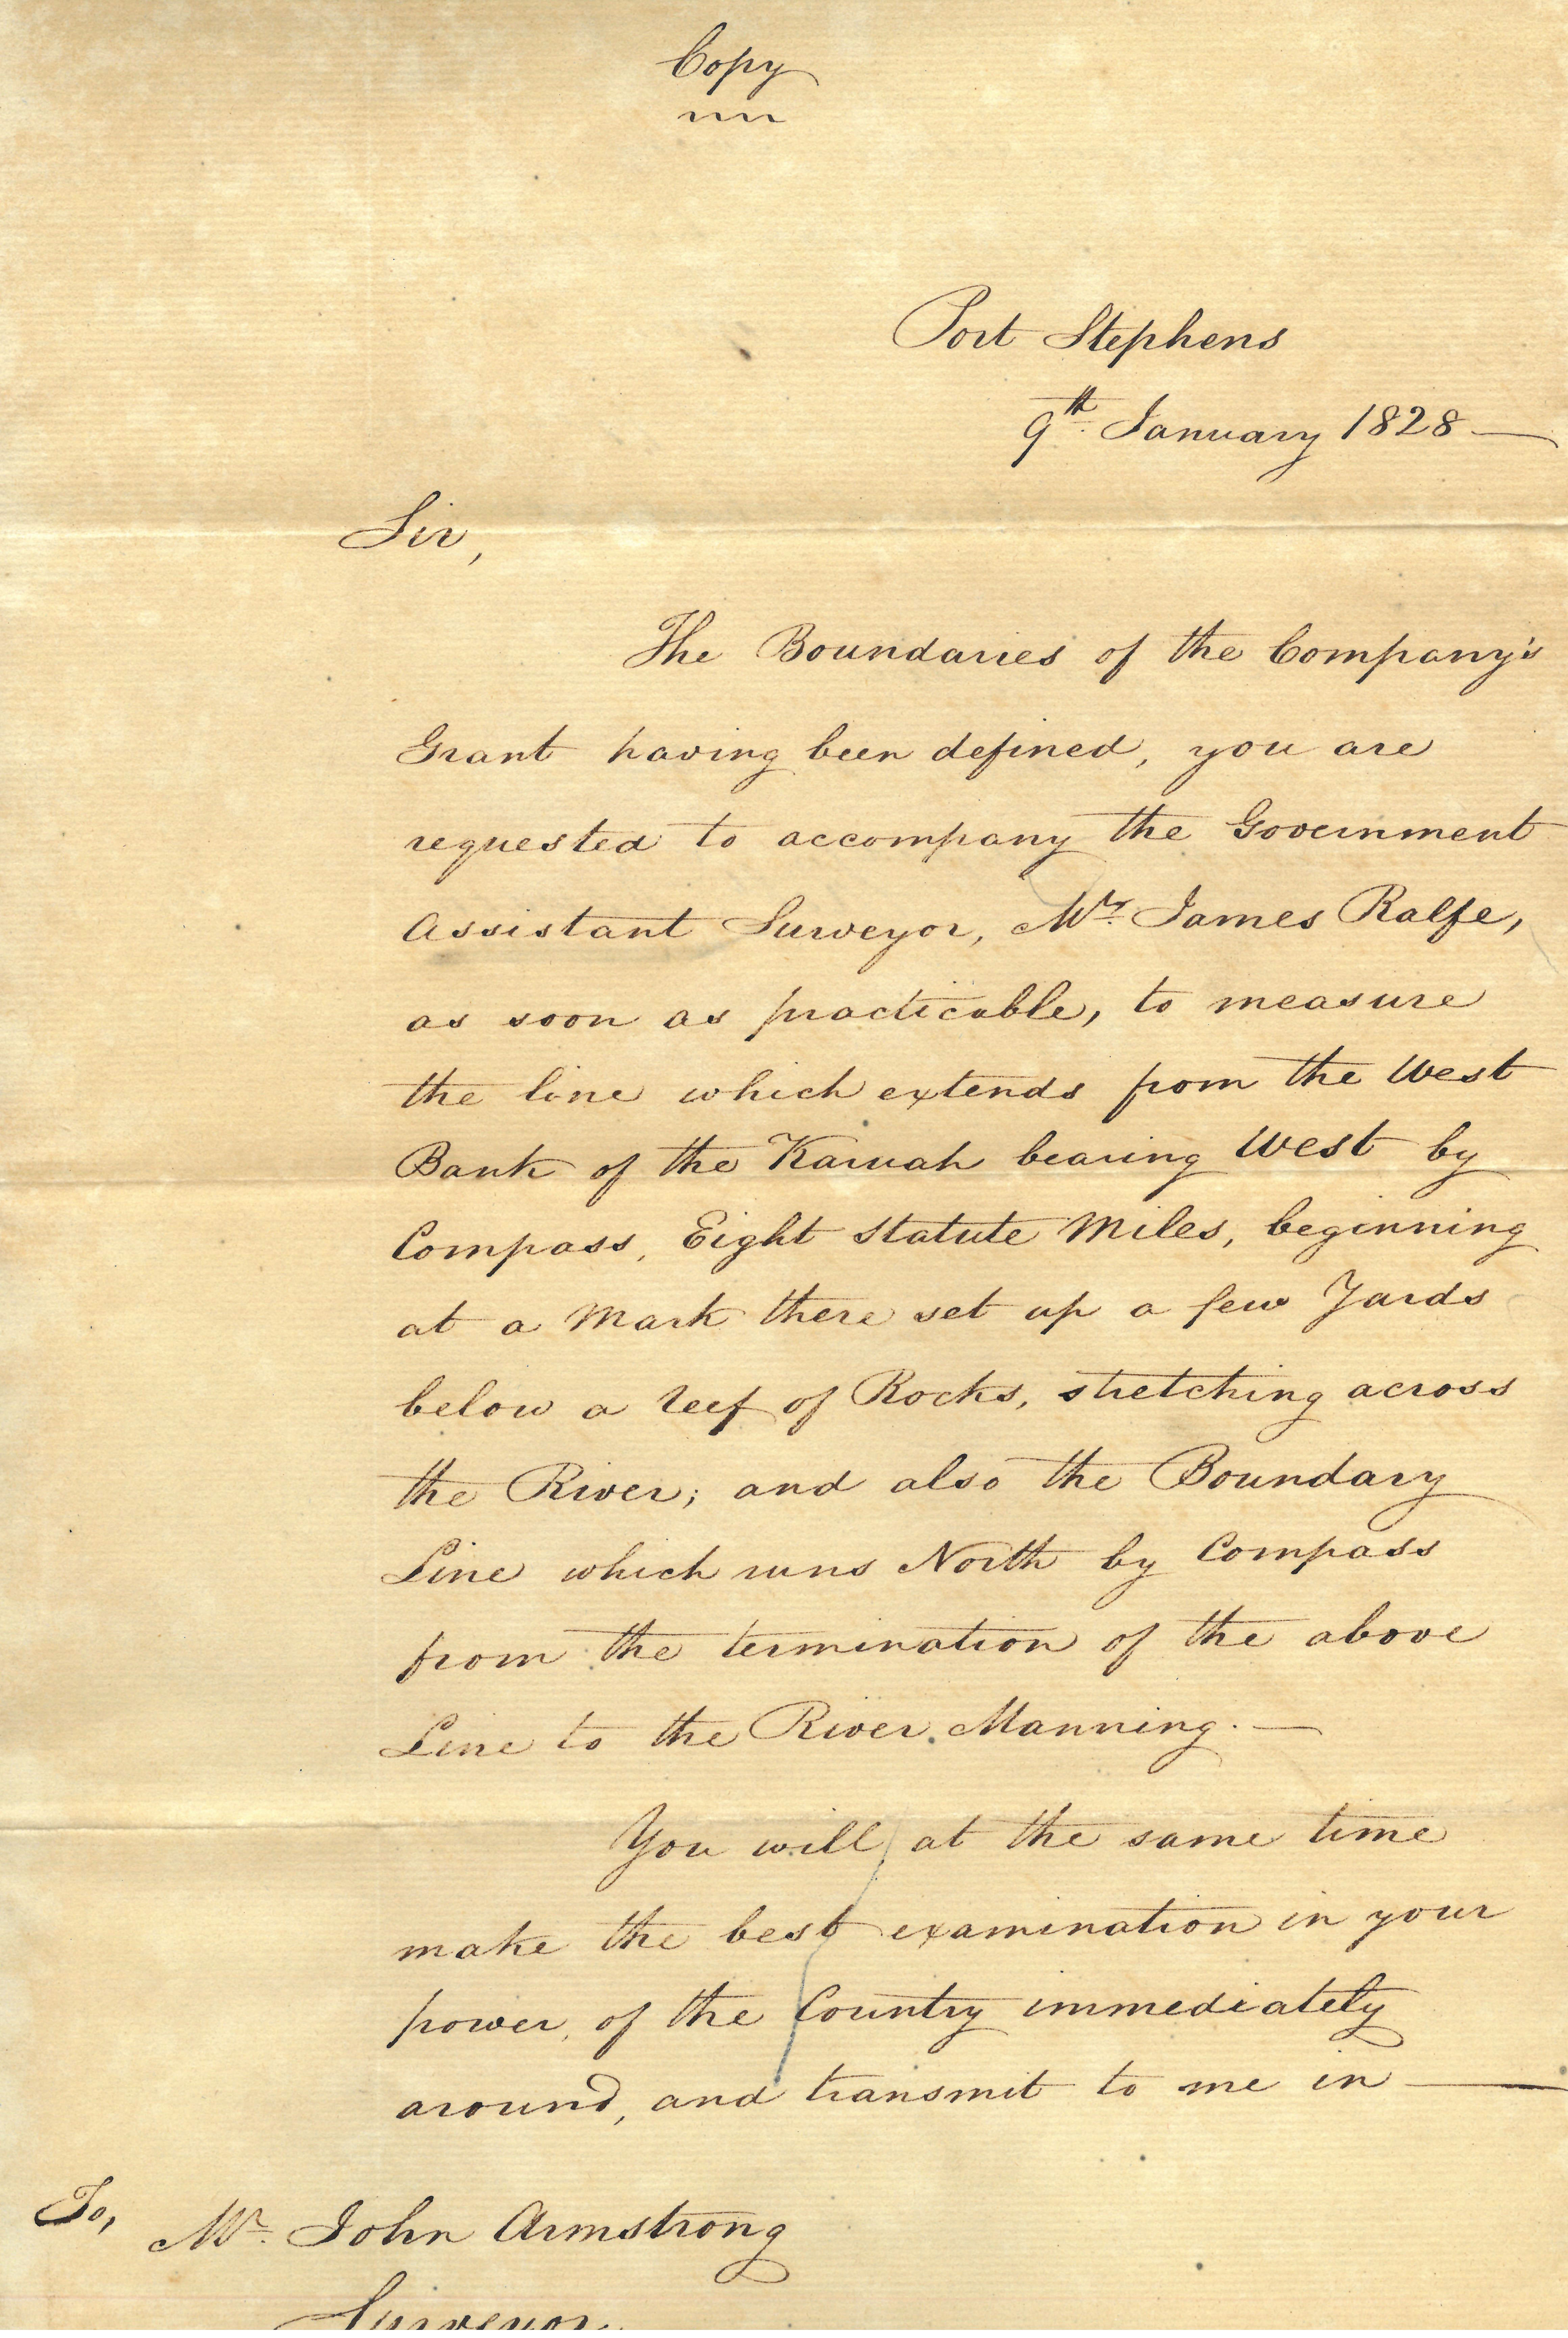 Letter from Chief Agent Robert Dawson to Australian Agricultural Company Surveyor John Armstrong requesting he accompany Government Surveyor James Ralfe to survey land in the Port Stephens region, New South Wales, 9 January 1828 (1-15-4b).  